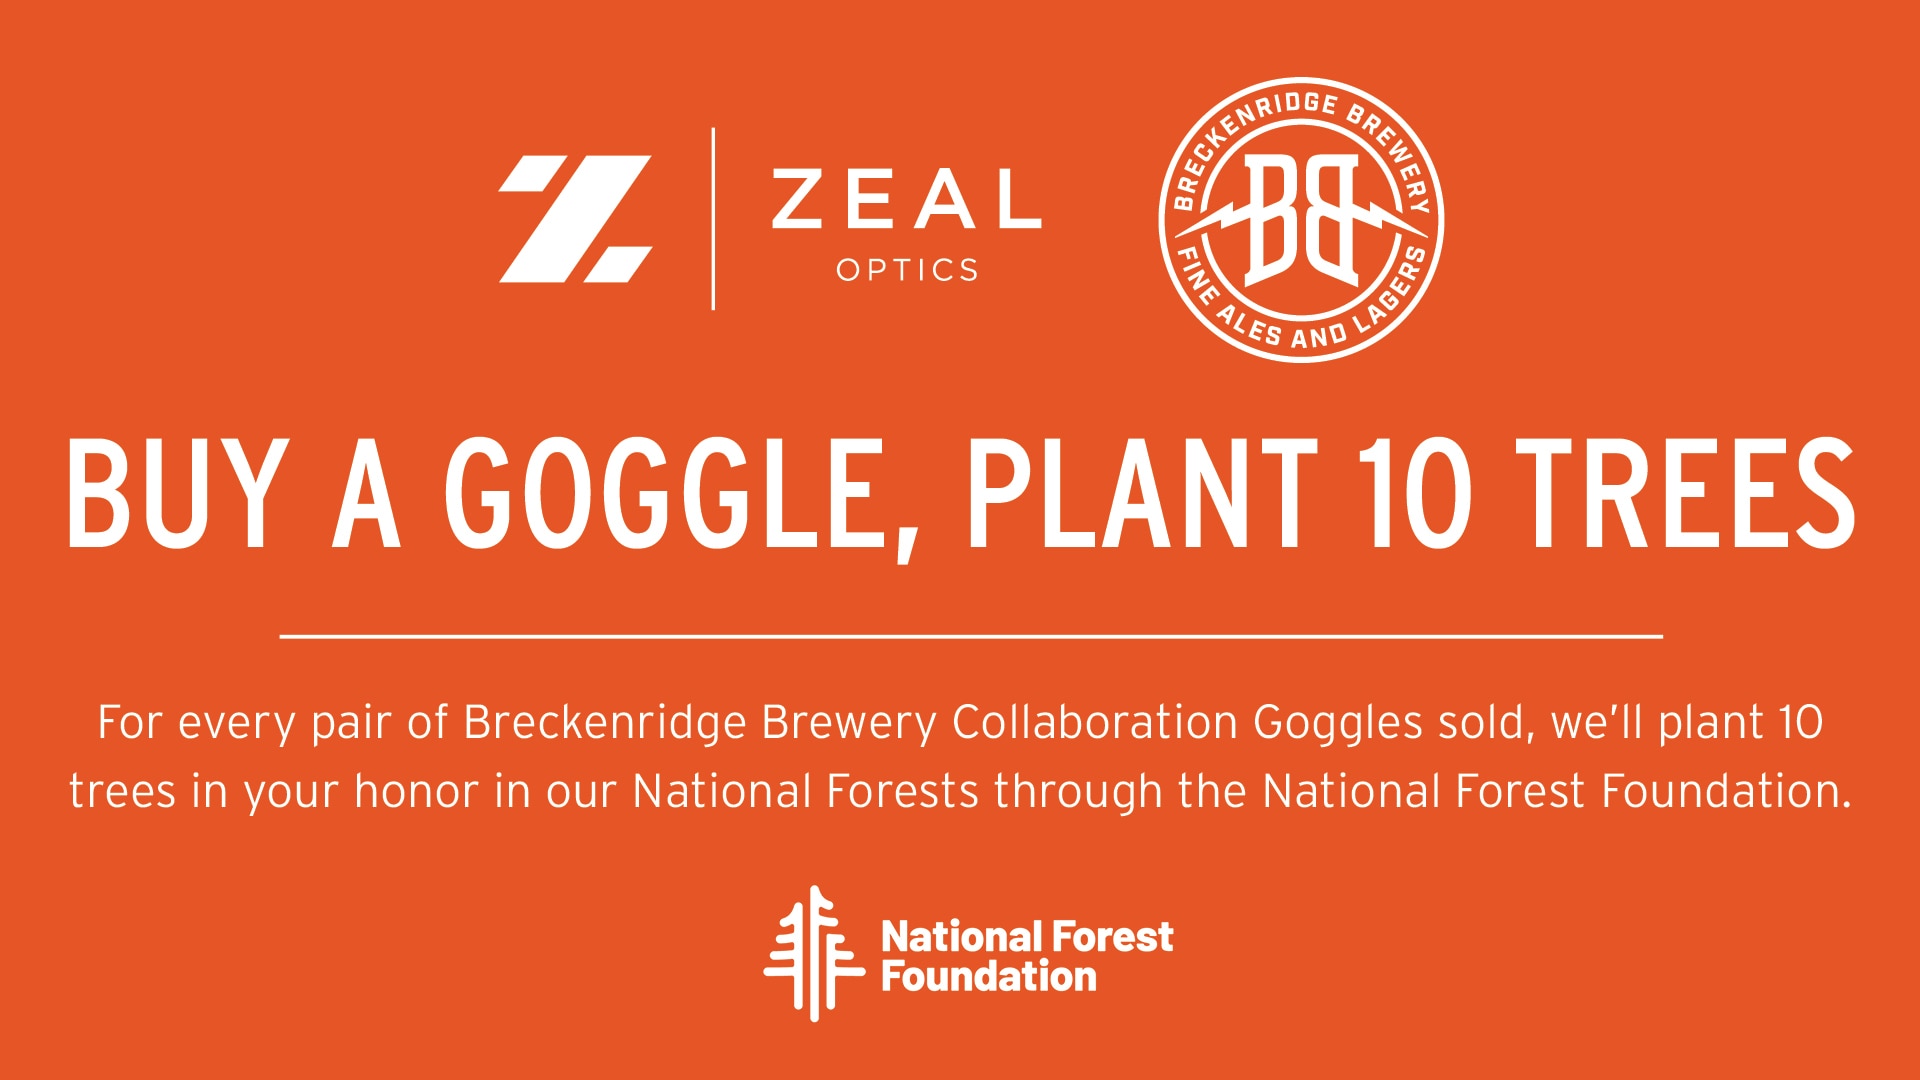 white Zeal and Breckenridge Brewery logos on an orange background and call out of Zeal's collaboration with Breck Brewery